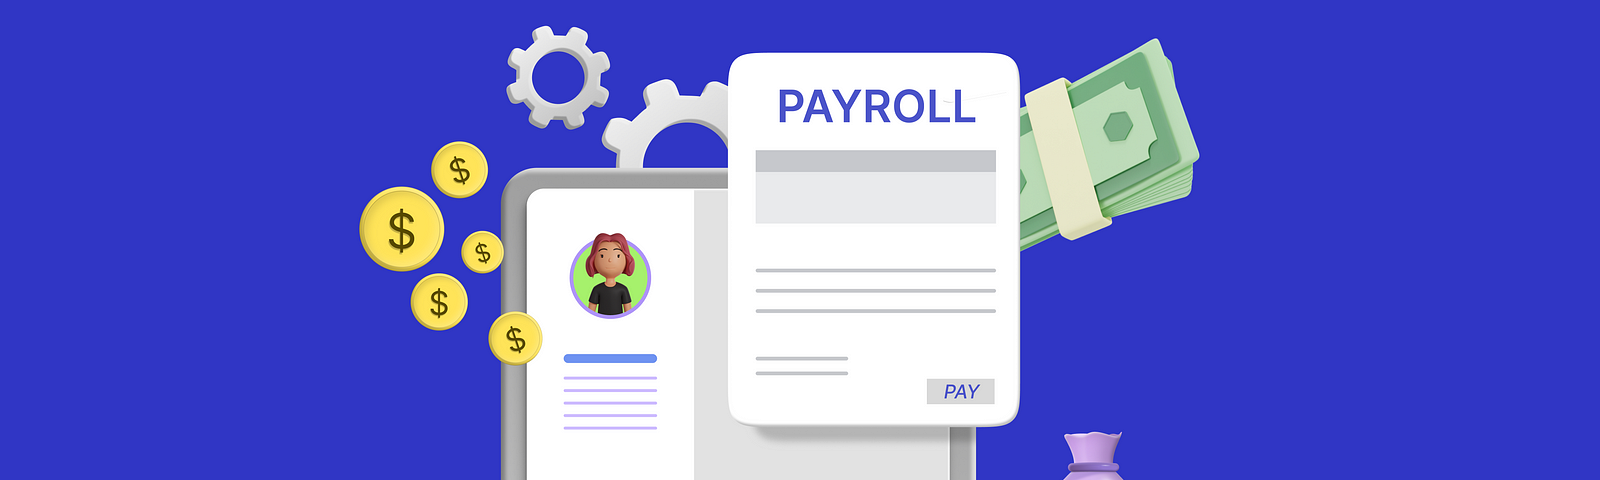 Maximizing Fairness in Payroll and Compensation Through Strategic Business Intelligence